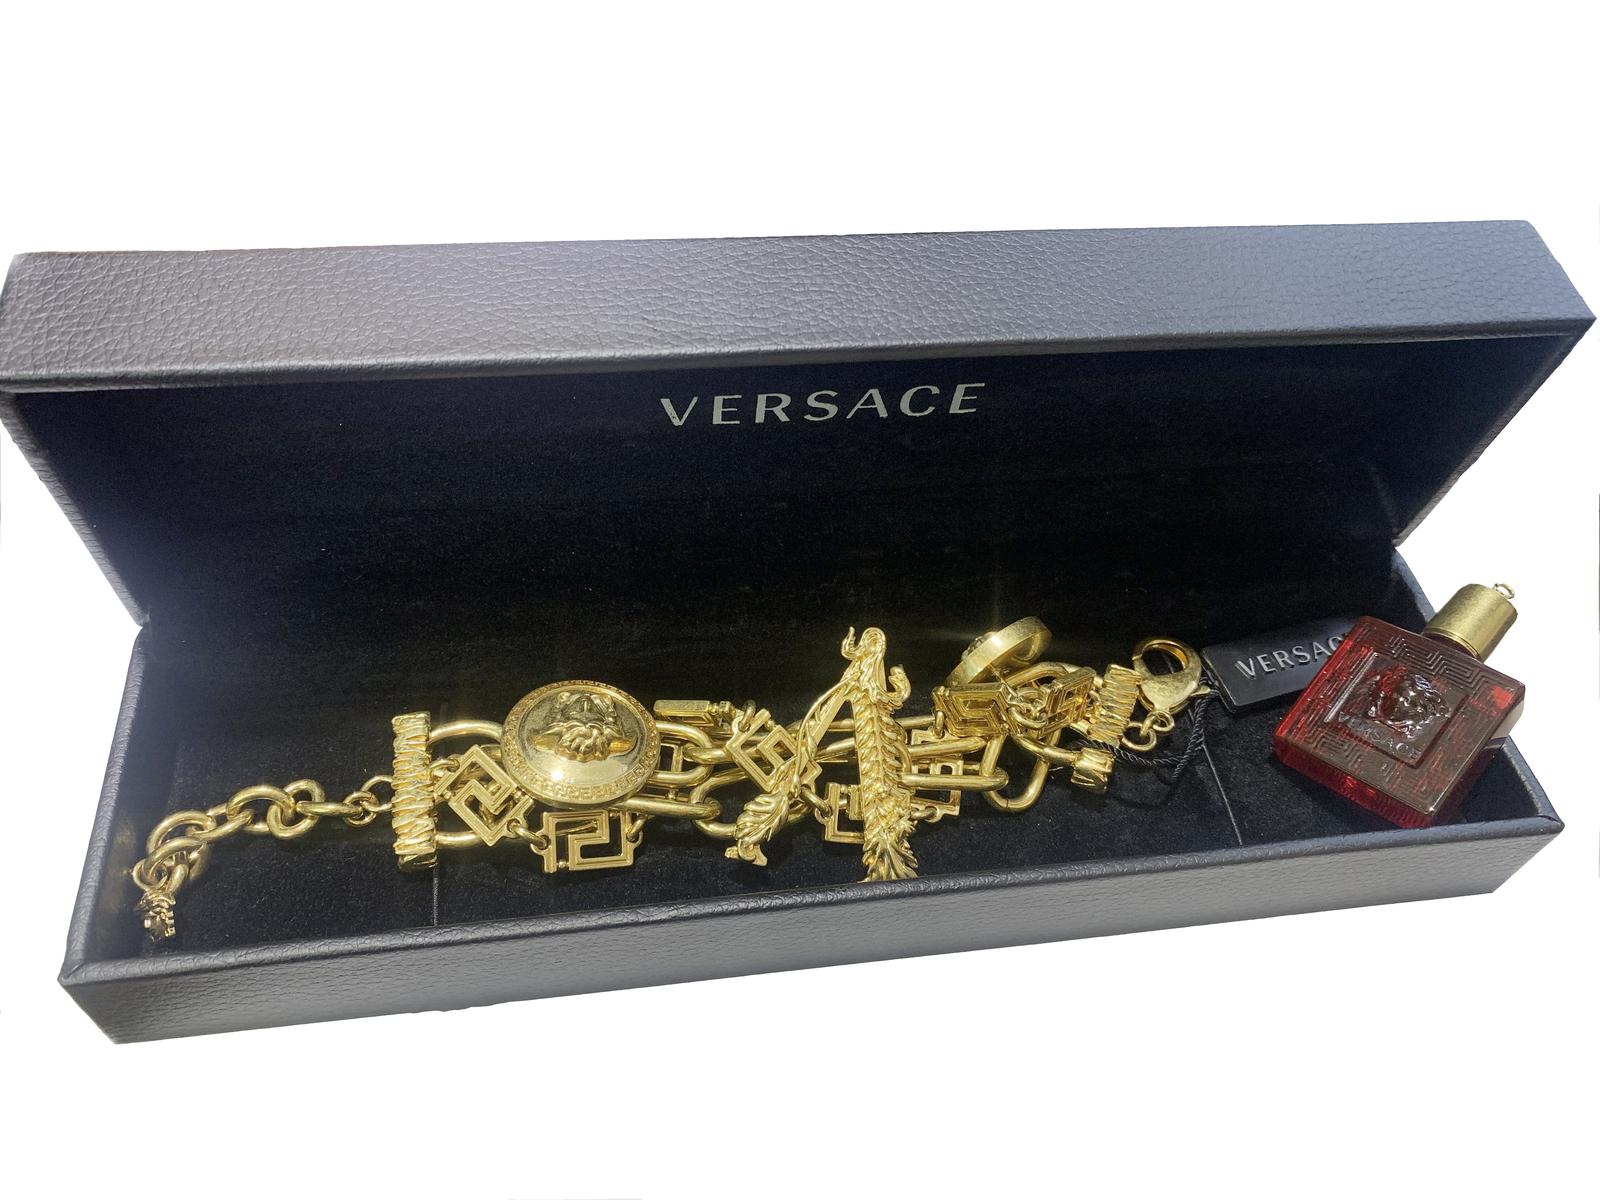 Versace Rare Gold Tone Charm Bracelet In Excellent Condition For Sale In New York, NY